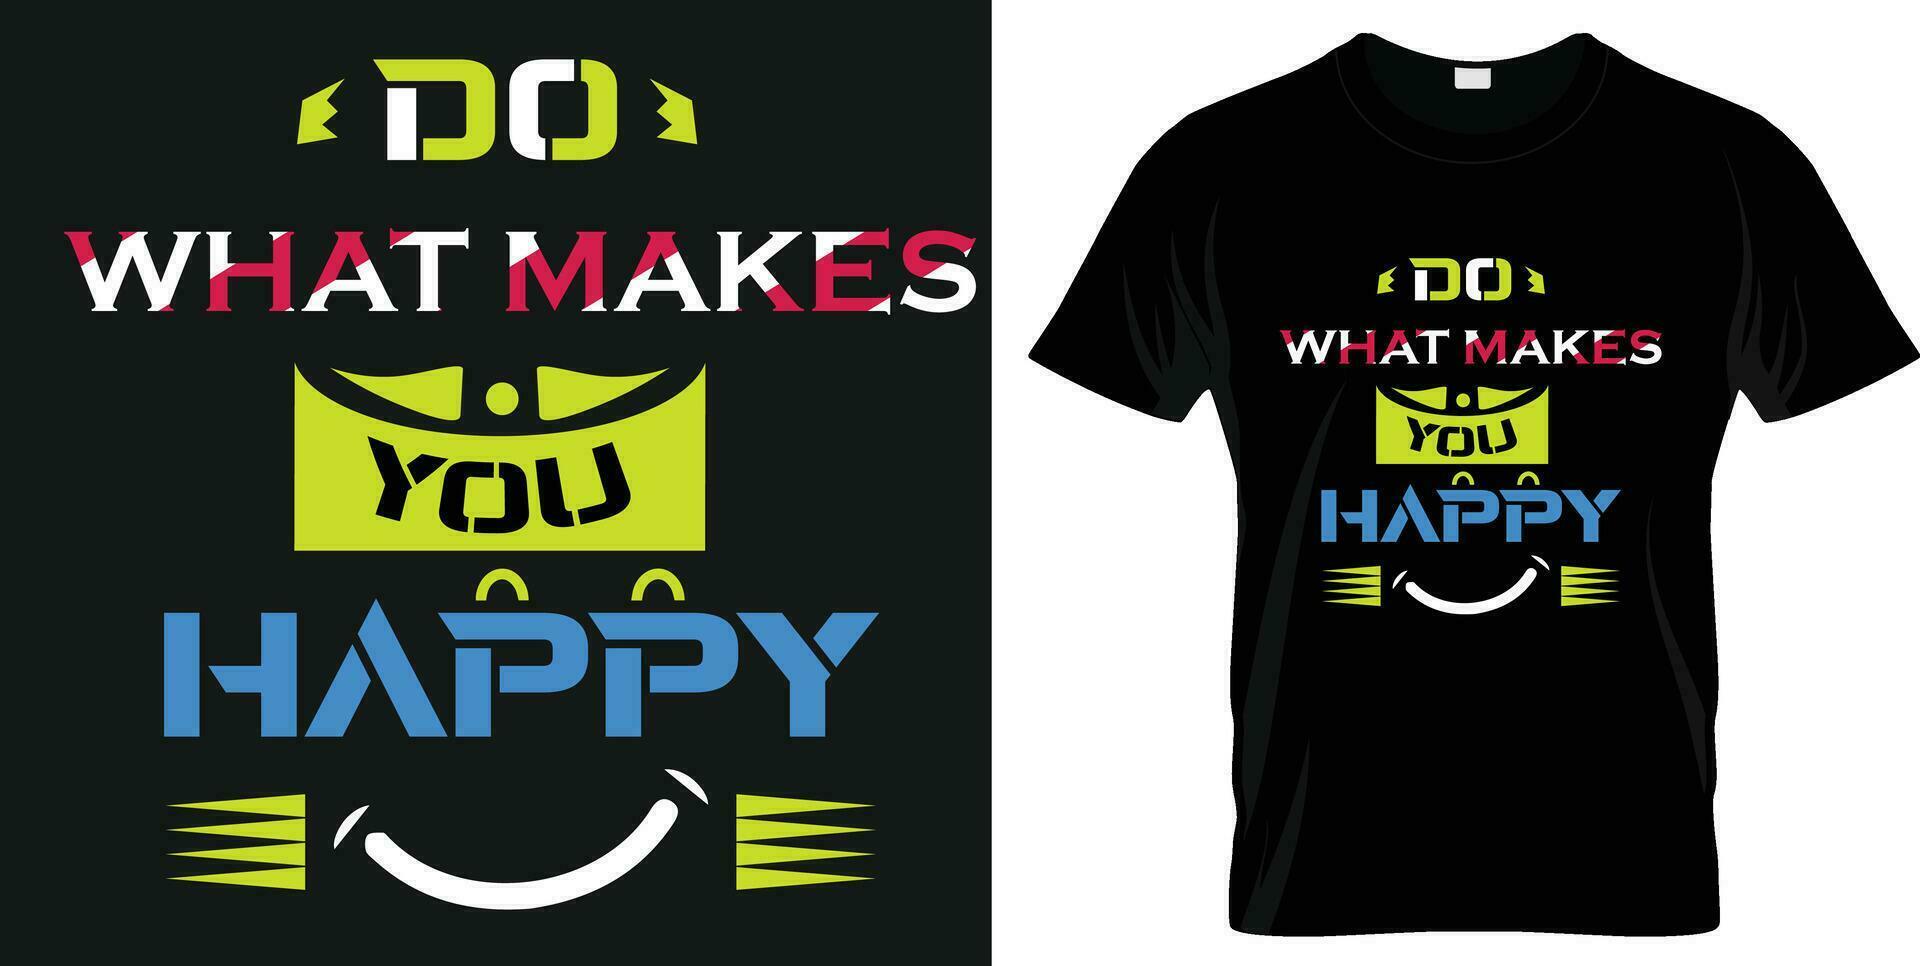 Do what makes you happy motivational typography t-shirt design, template for print, lettering t shirt vector